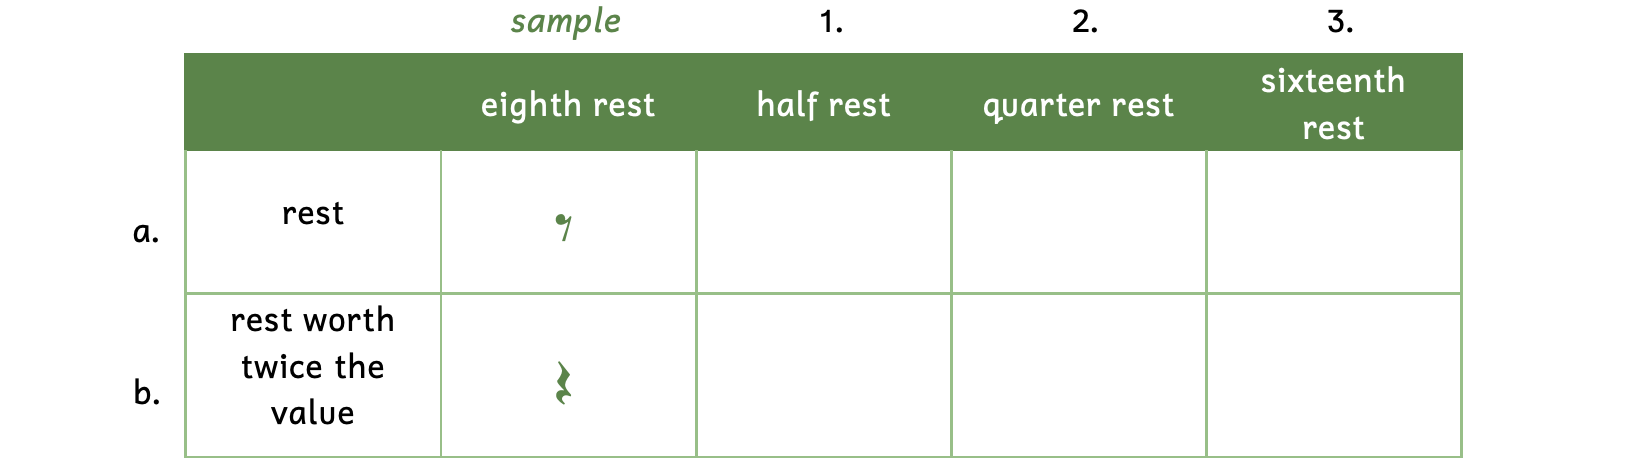 Exercise asks to write different types of rests and a rest that is worth twice the value. For the first row, write the given rest in the box. For the second row, write the rest that is worth twice the value of the given rest. The sample asks for an eighth rest so an eighth rest is drawn in the first row and a quarter rest is drawn in the second row. Number 1 asks for a half rest. Number 2 asks for a quarter rest. Number 3 asks for a sixteenth rest.